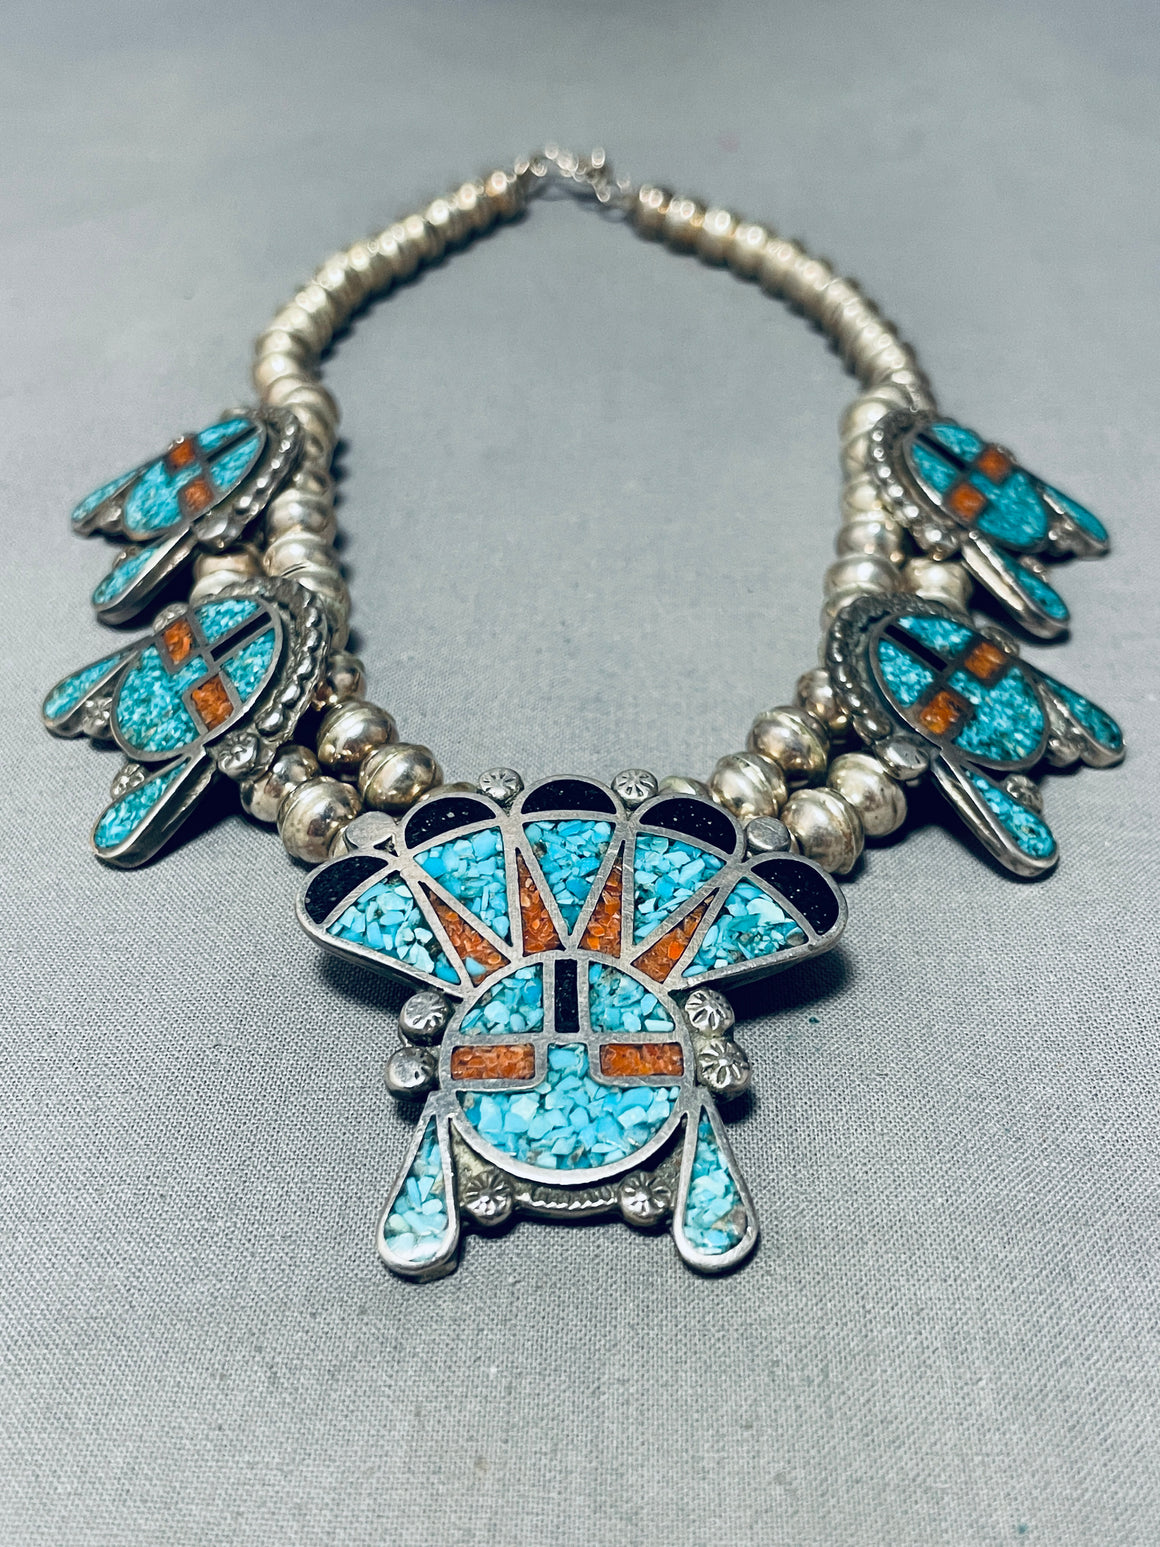 Authentic Vintage Native American Jewelry, Turquoise Jewelry on Sale ...